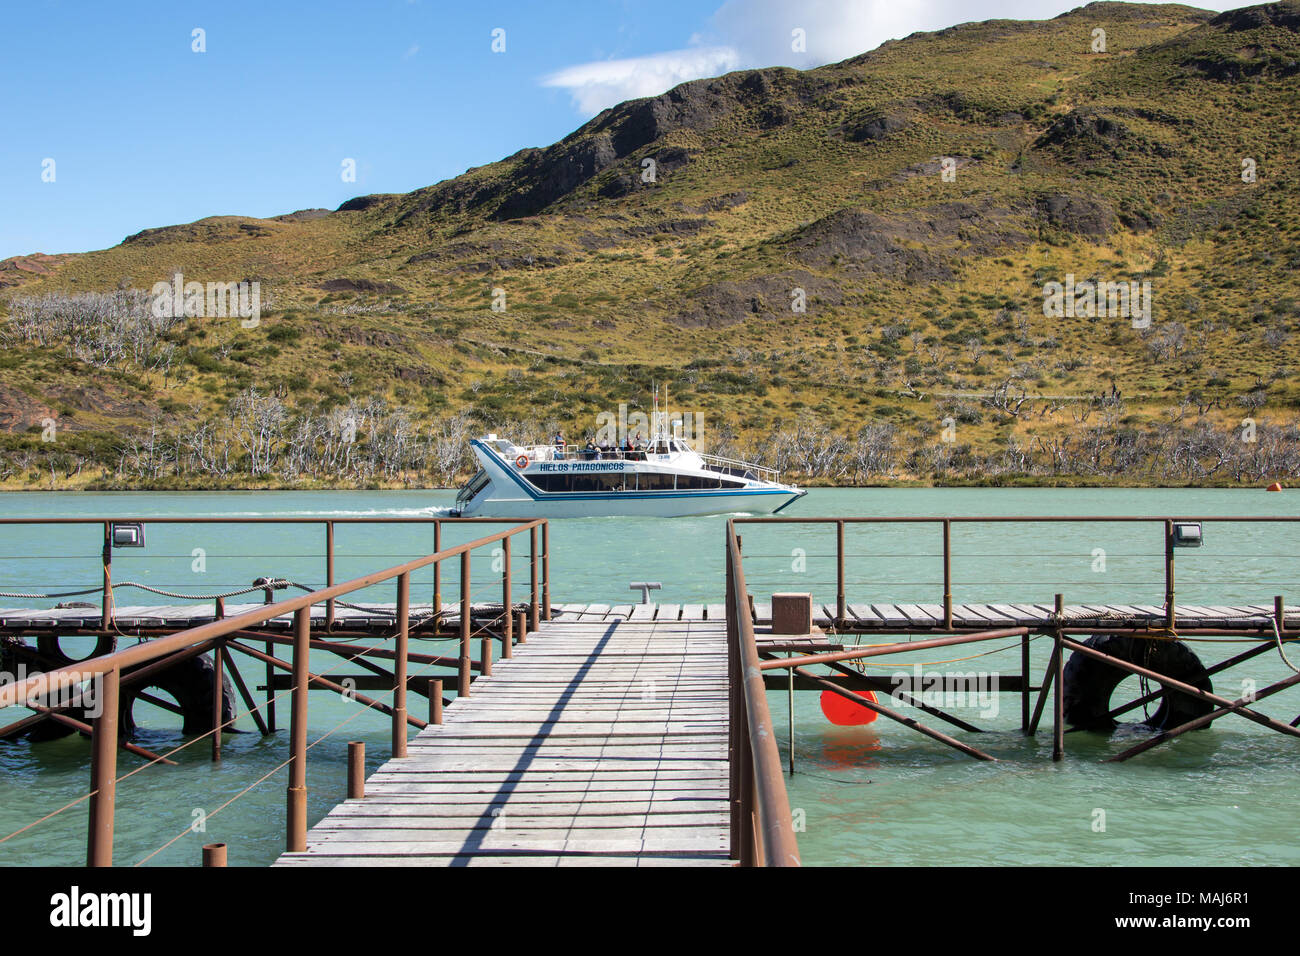 Hielos Patagonicos, Sightseeing Boot am Lago Pehoe, Torres del Paine Nationalpark, Patagonien, Chile Stockfoto